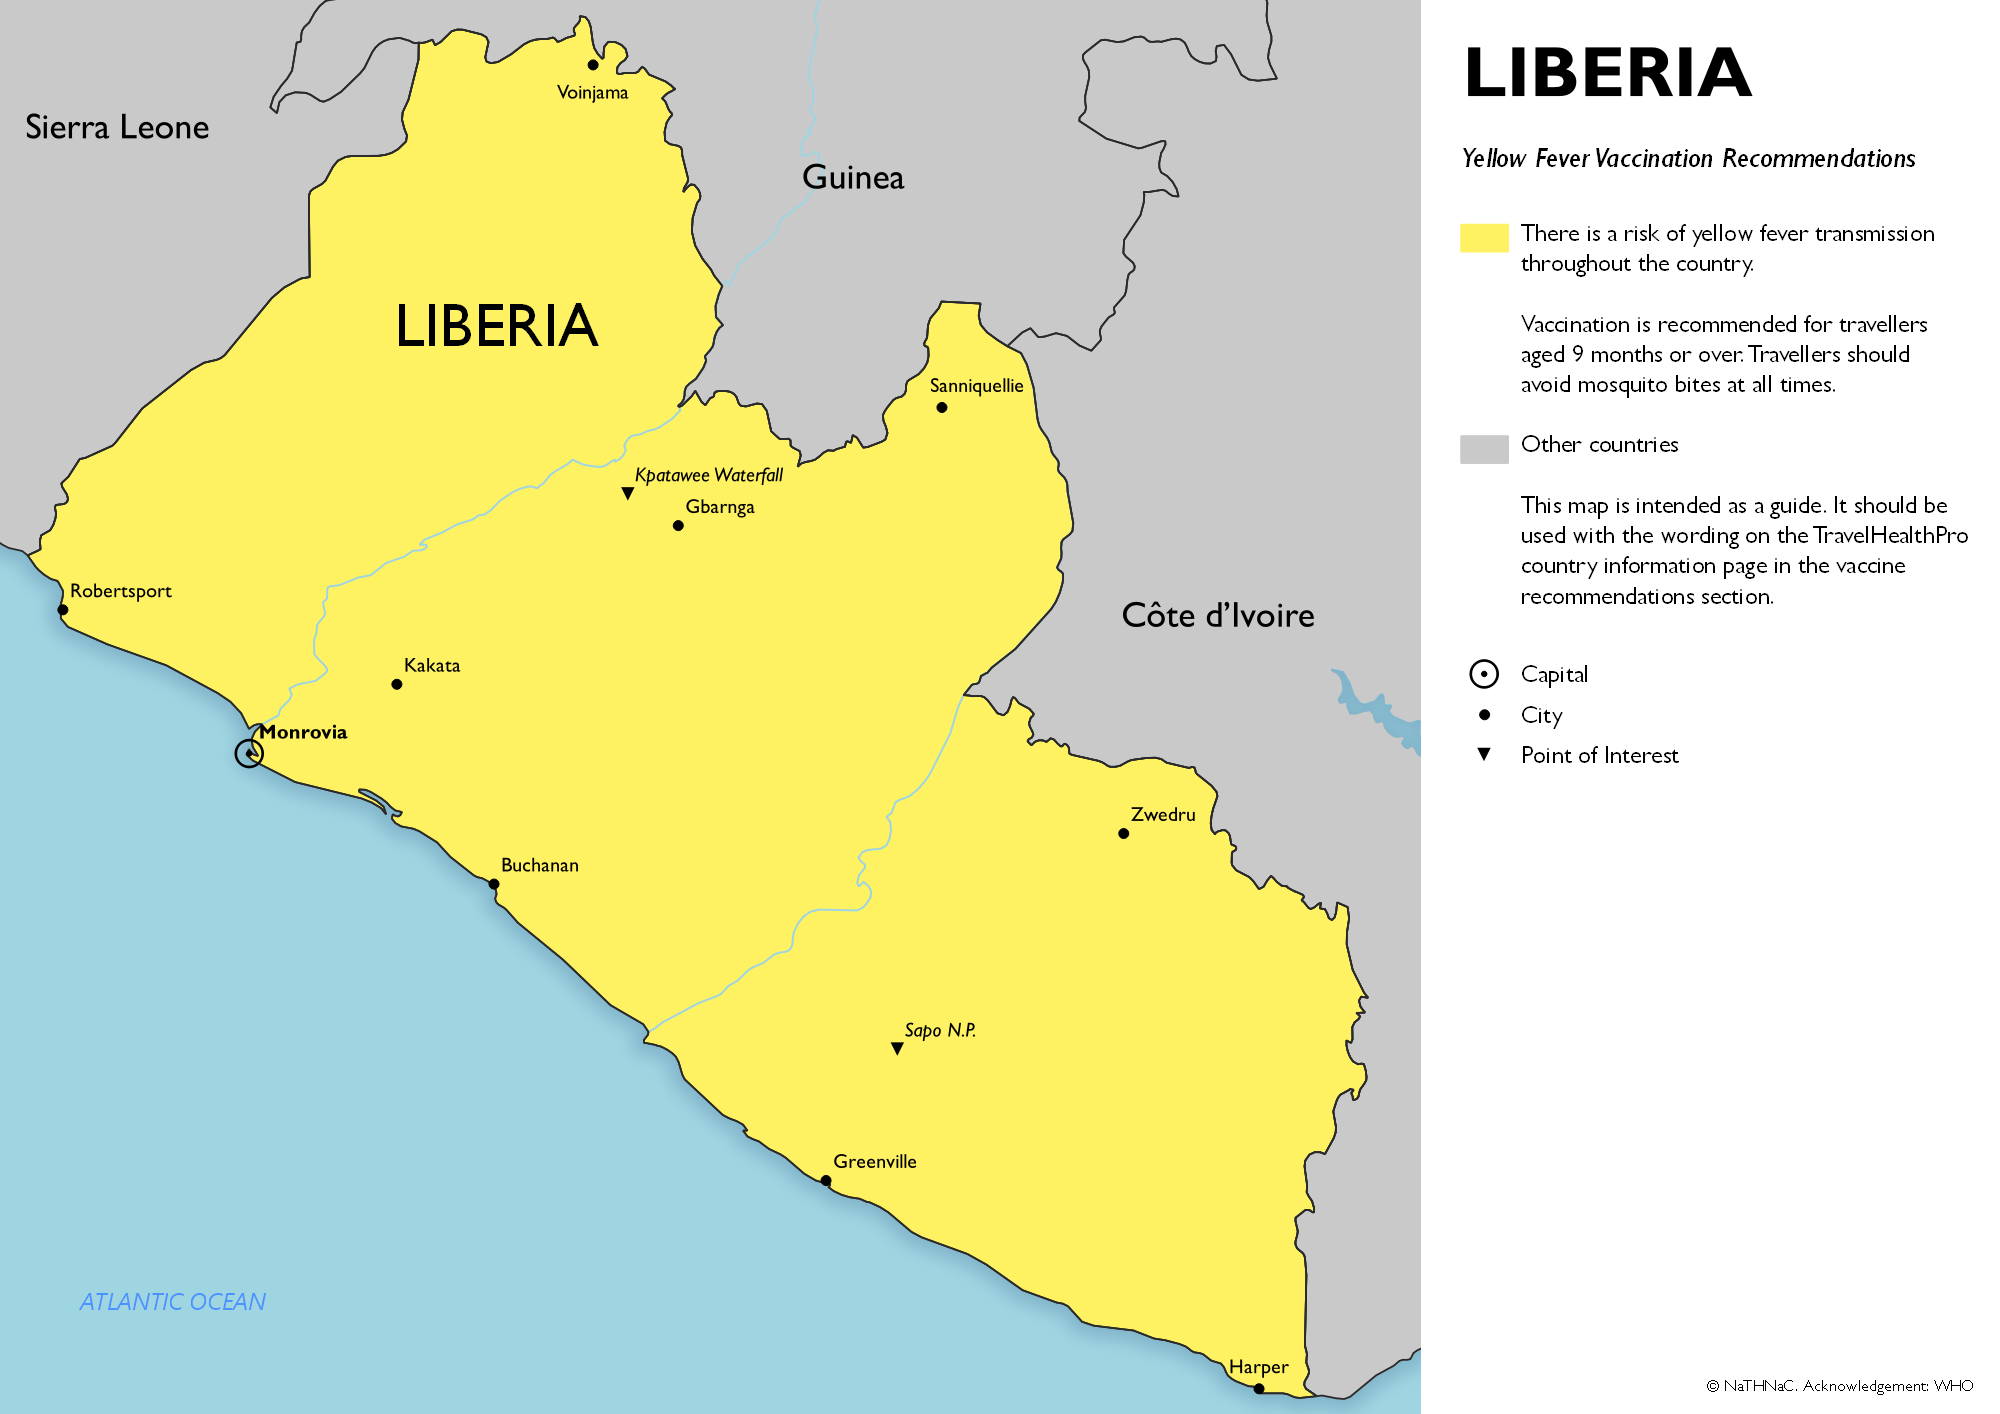 Yellow fever vaccine recommendation map for Liberia